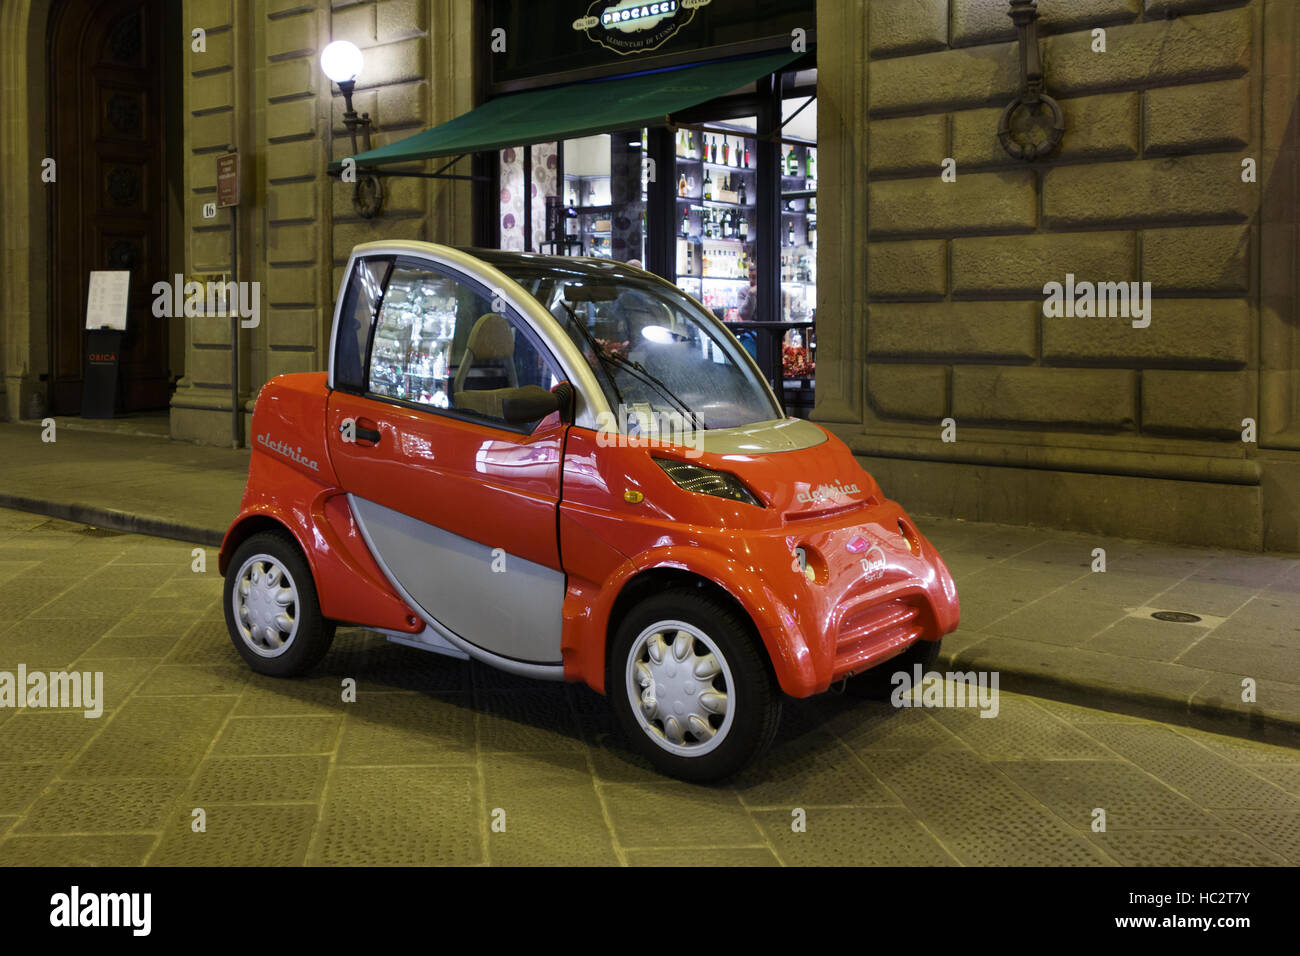 Two-seater Elettrica green car parked outside a shop at night, Via de' Tornabuoni, Florence, Tuscany, Italy Stock Photo